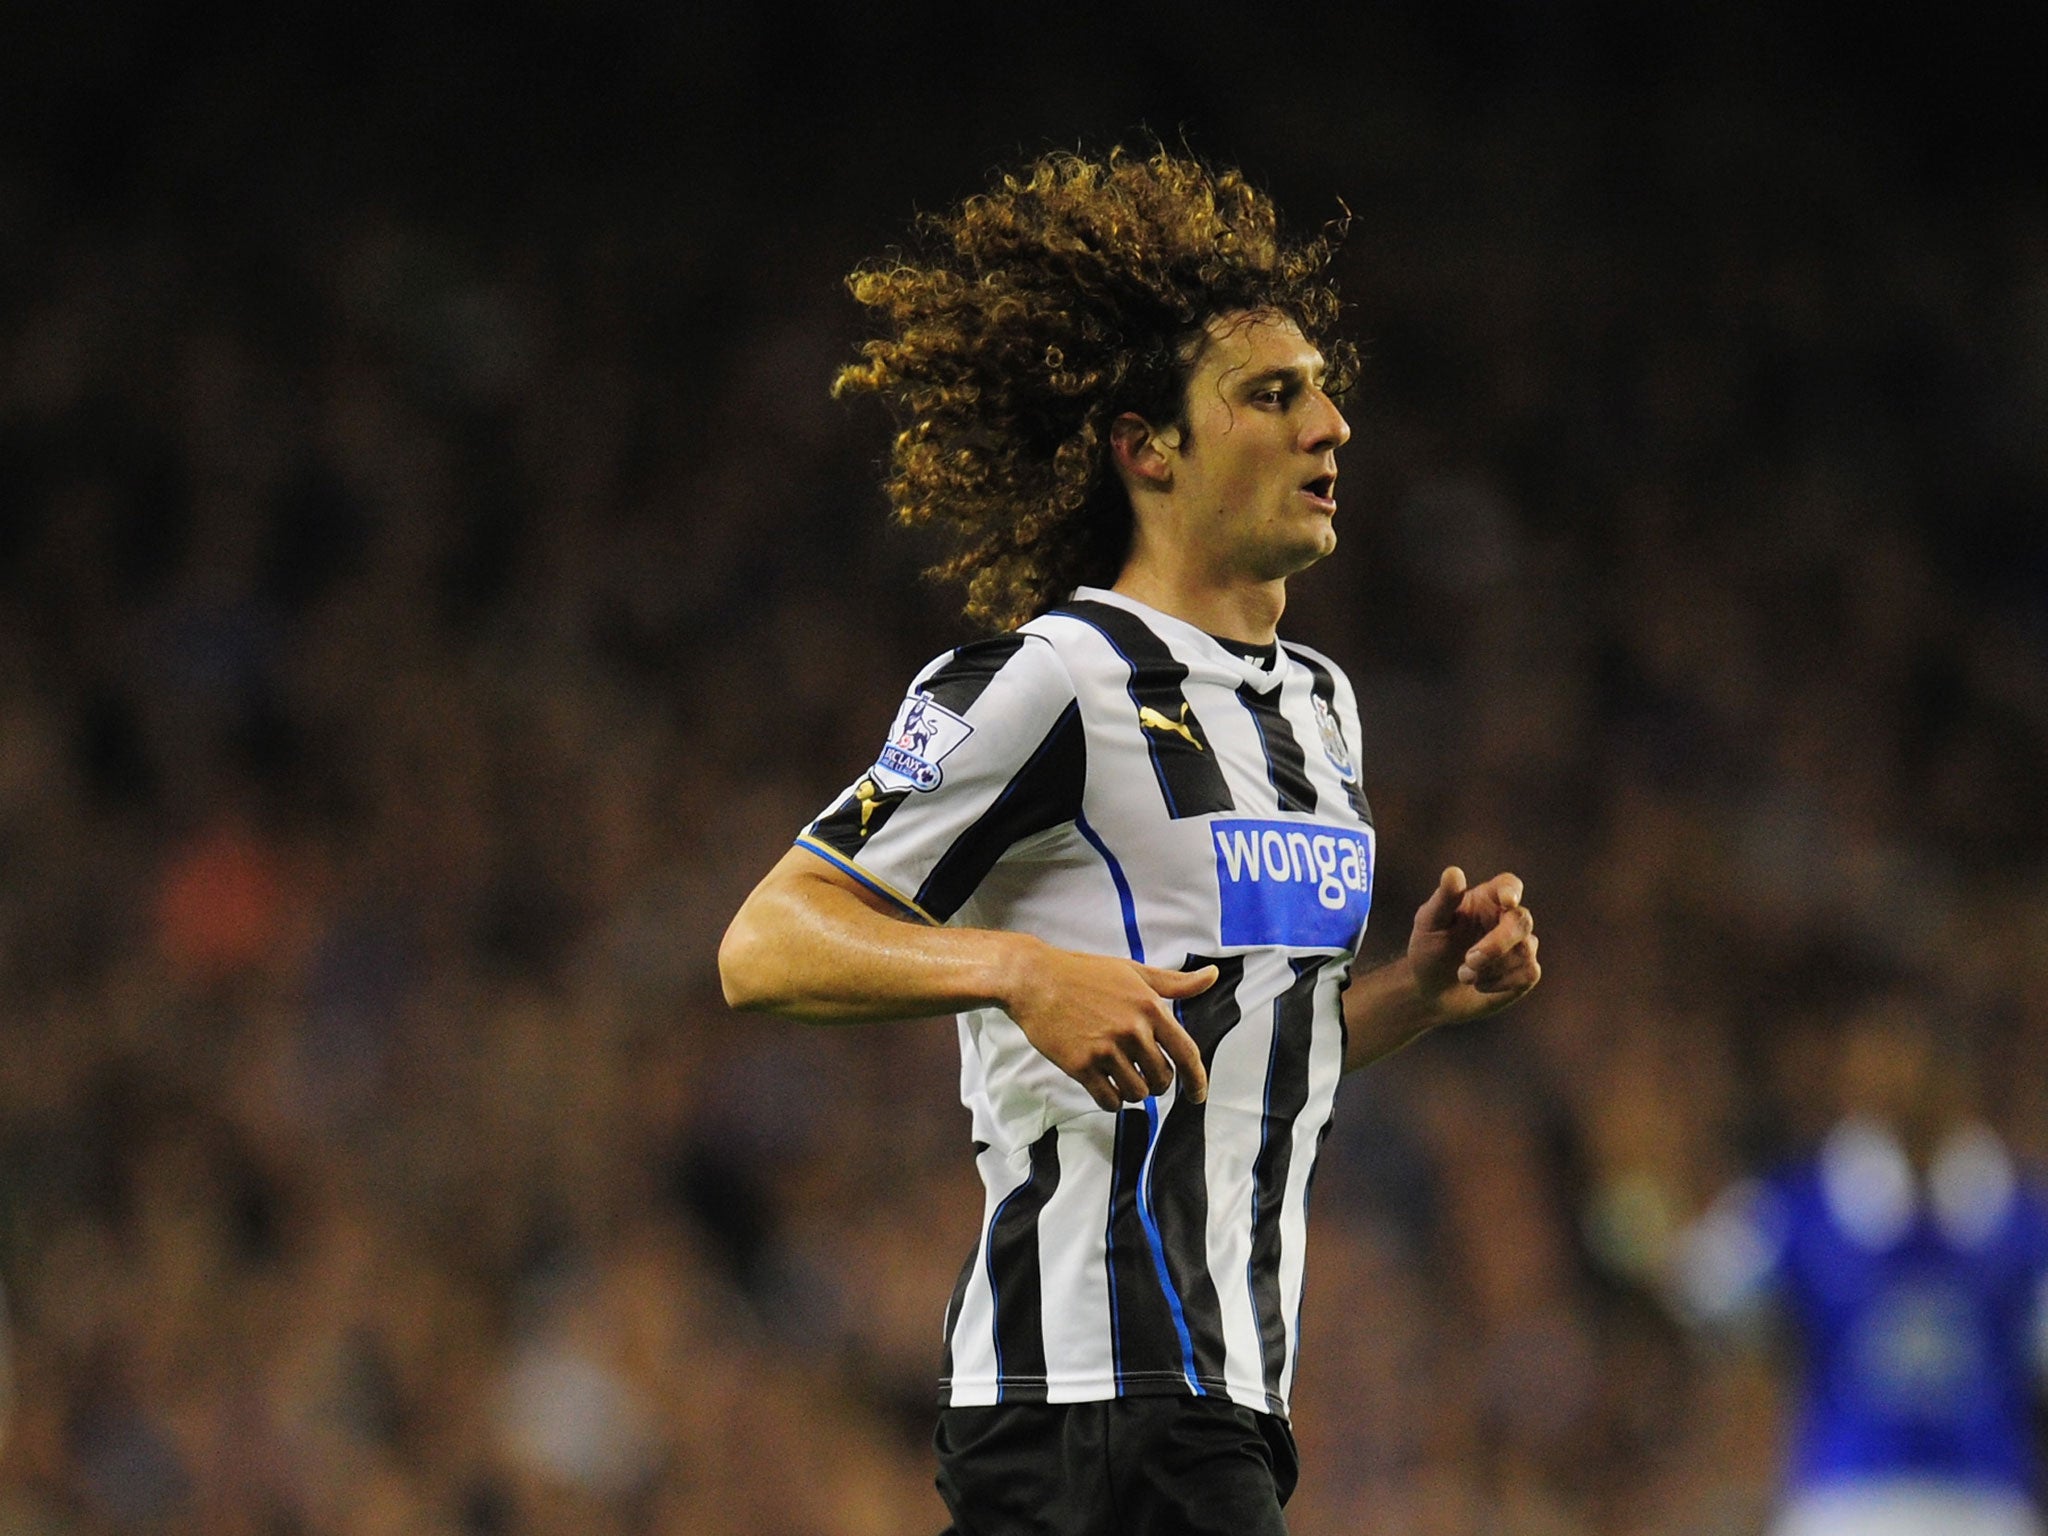 Newcastle captain Fabricio Coloccini has claimed he is happy at St James's Park